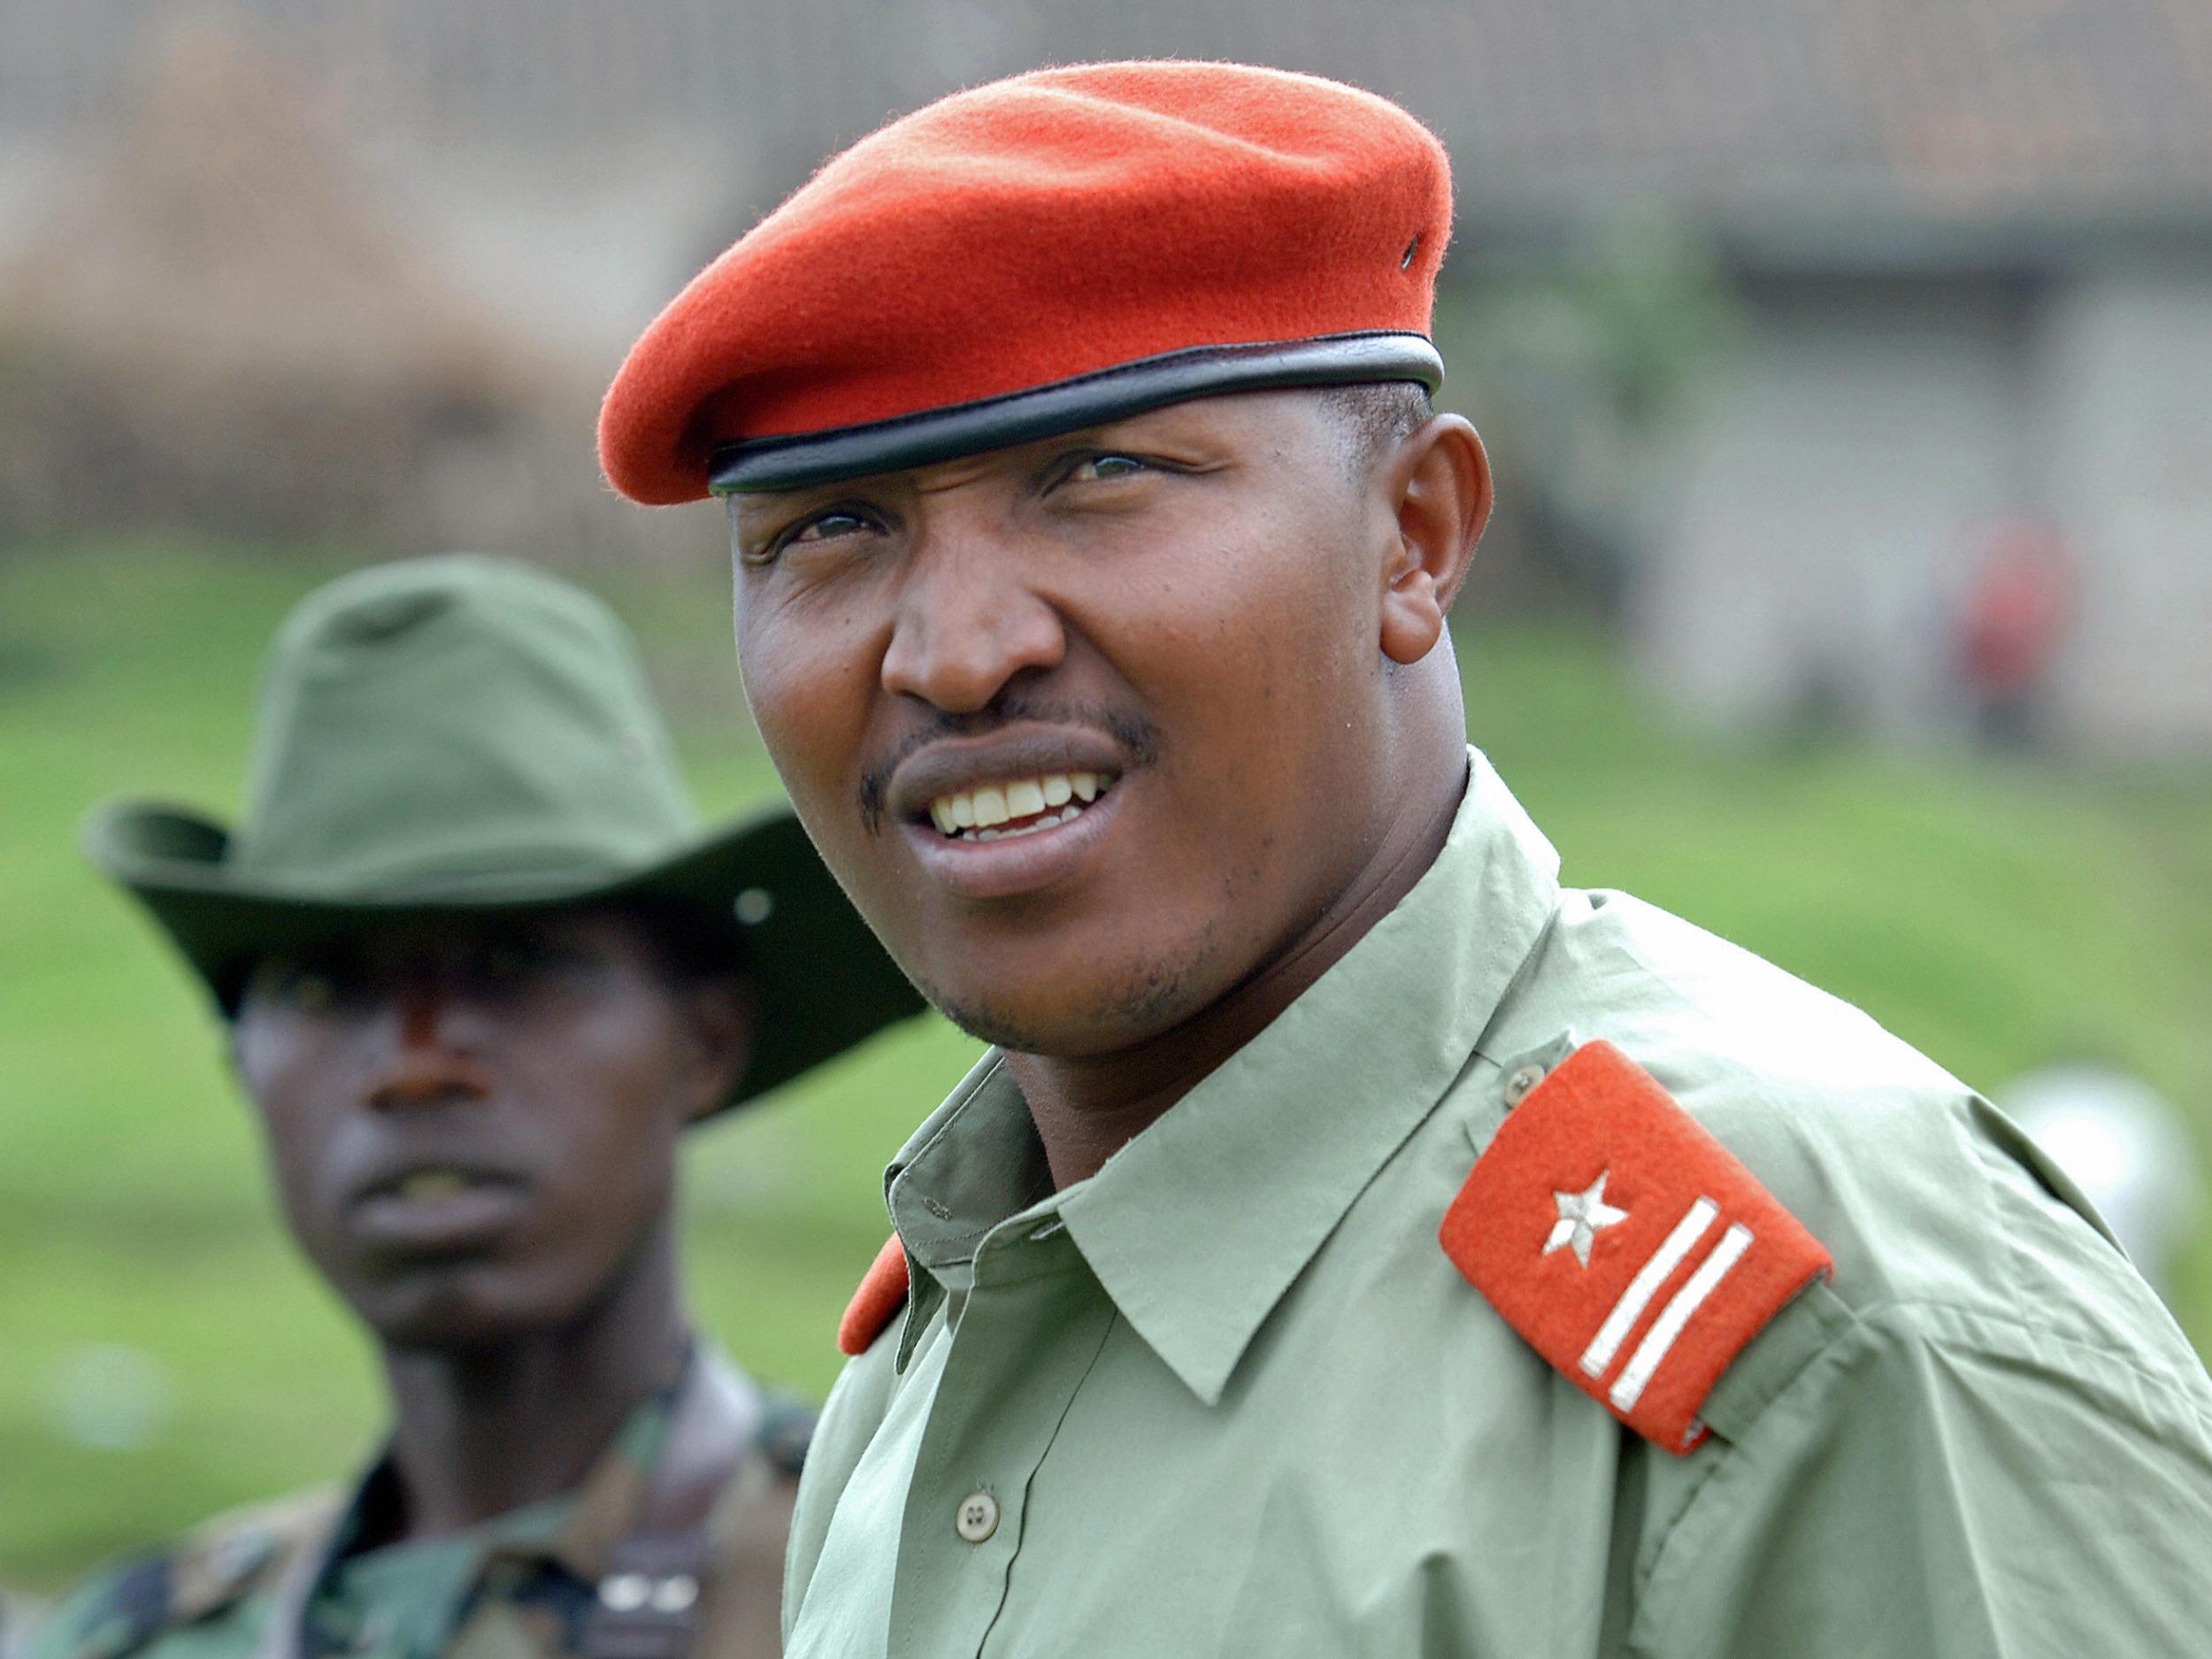 Until 2013, Ntaganda claimed he was innocent of any wrongdoing before turning himself in